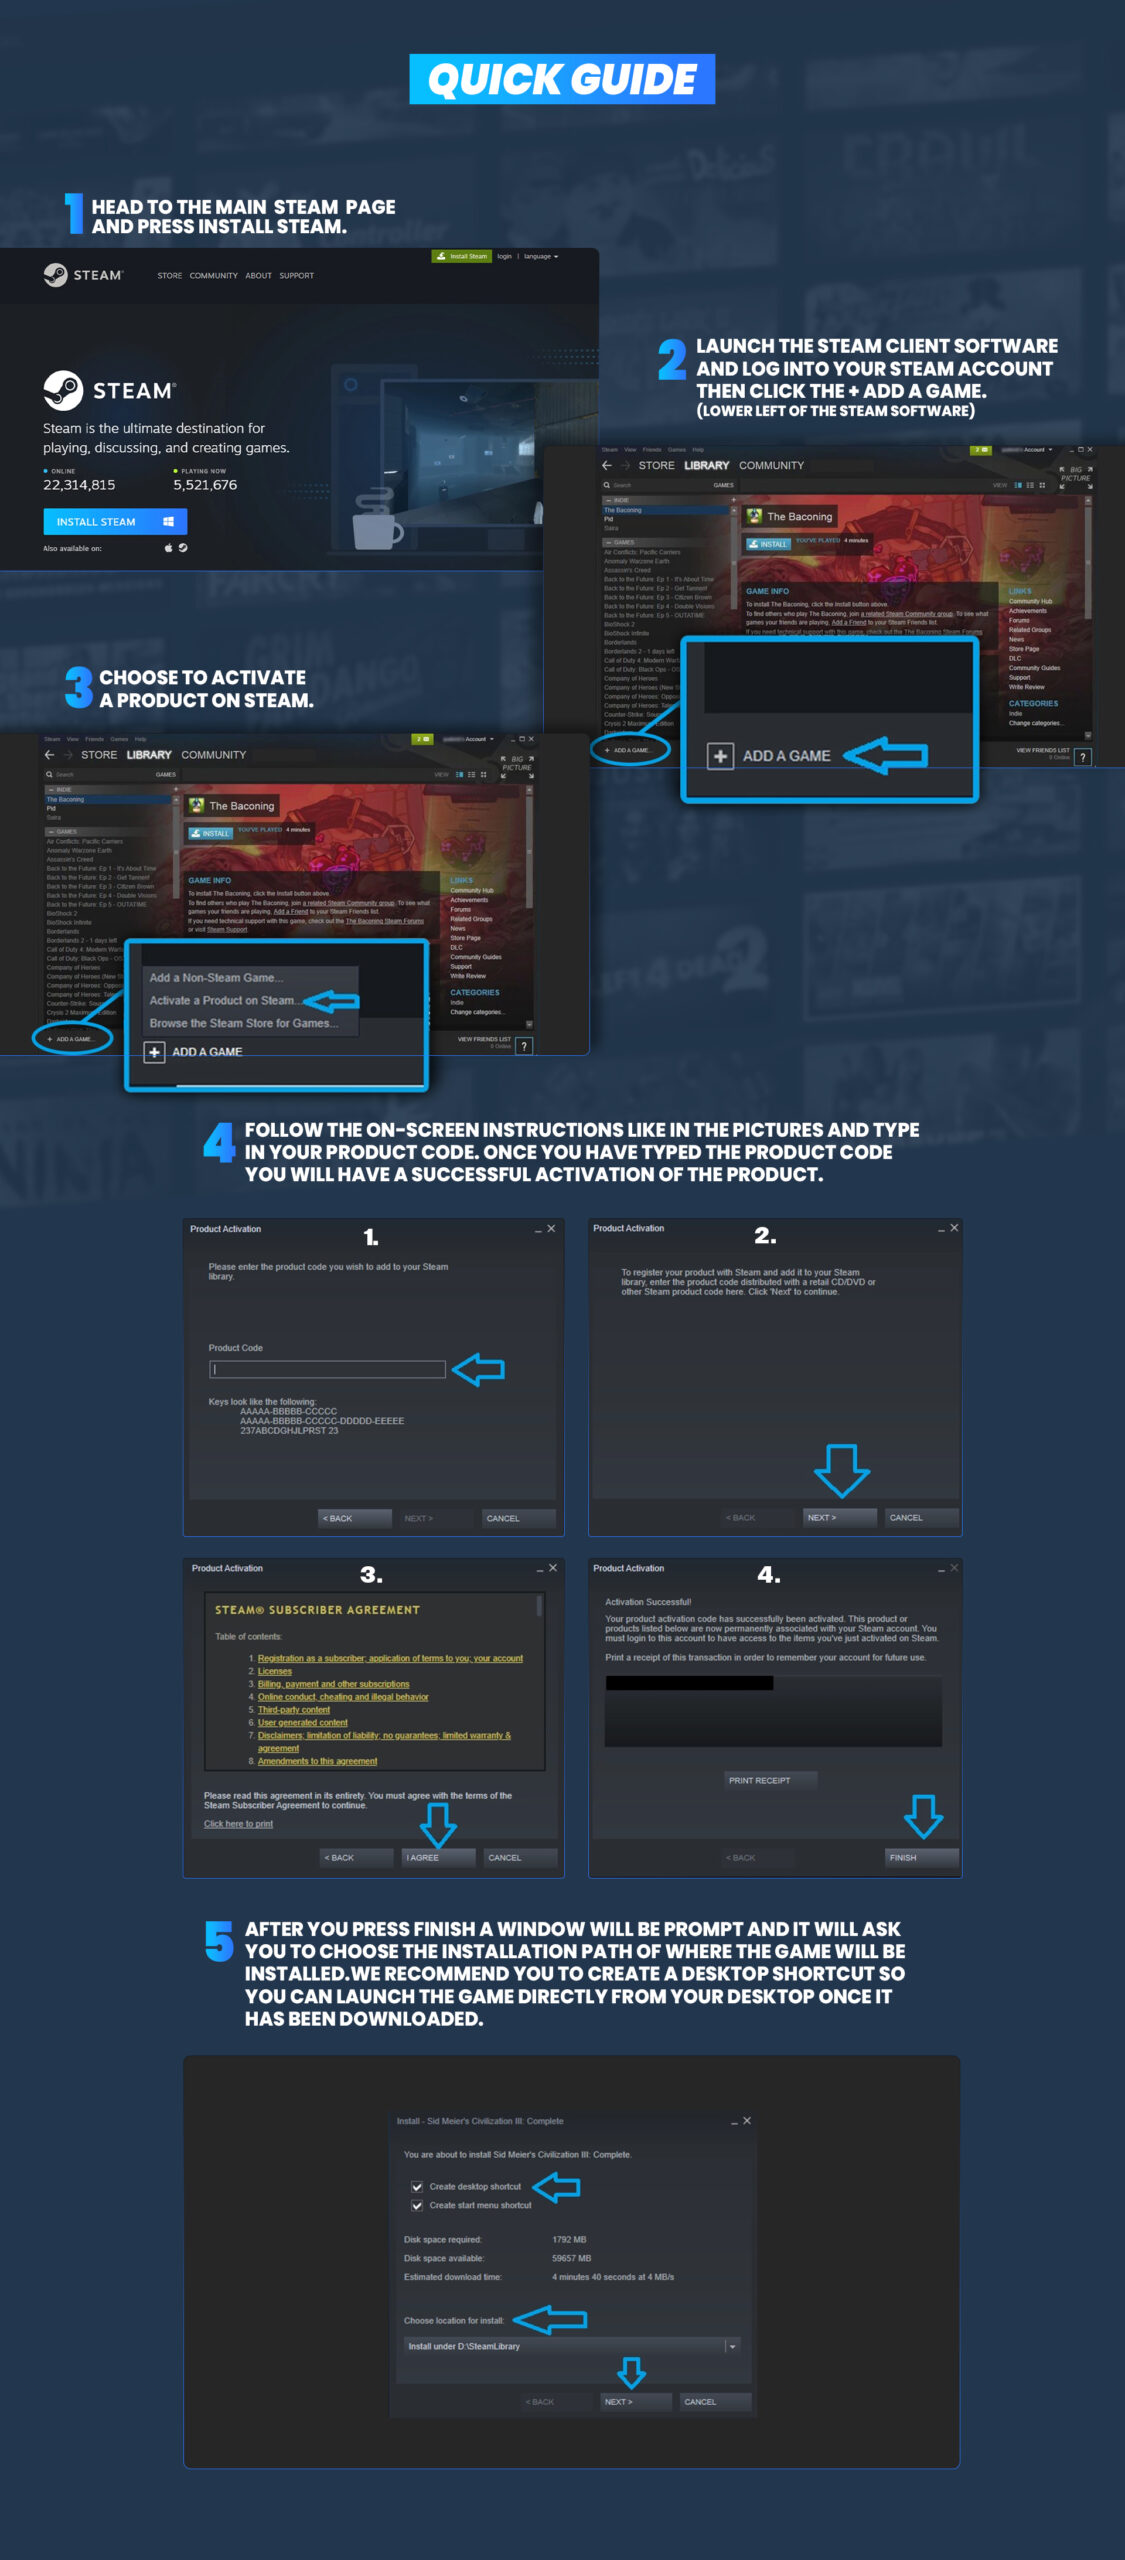 Complete Guide for Steam key activation process